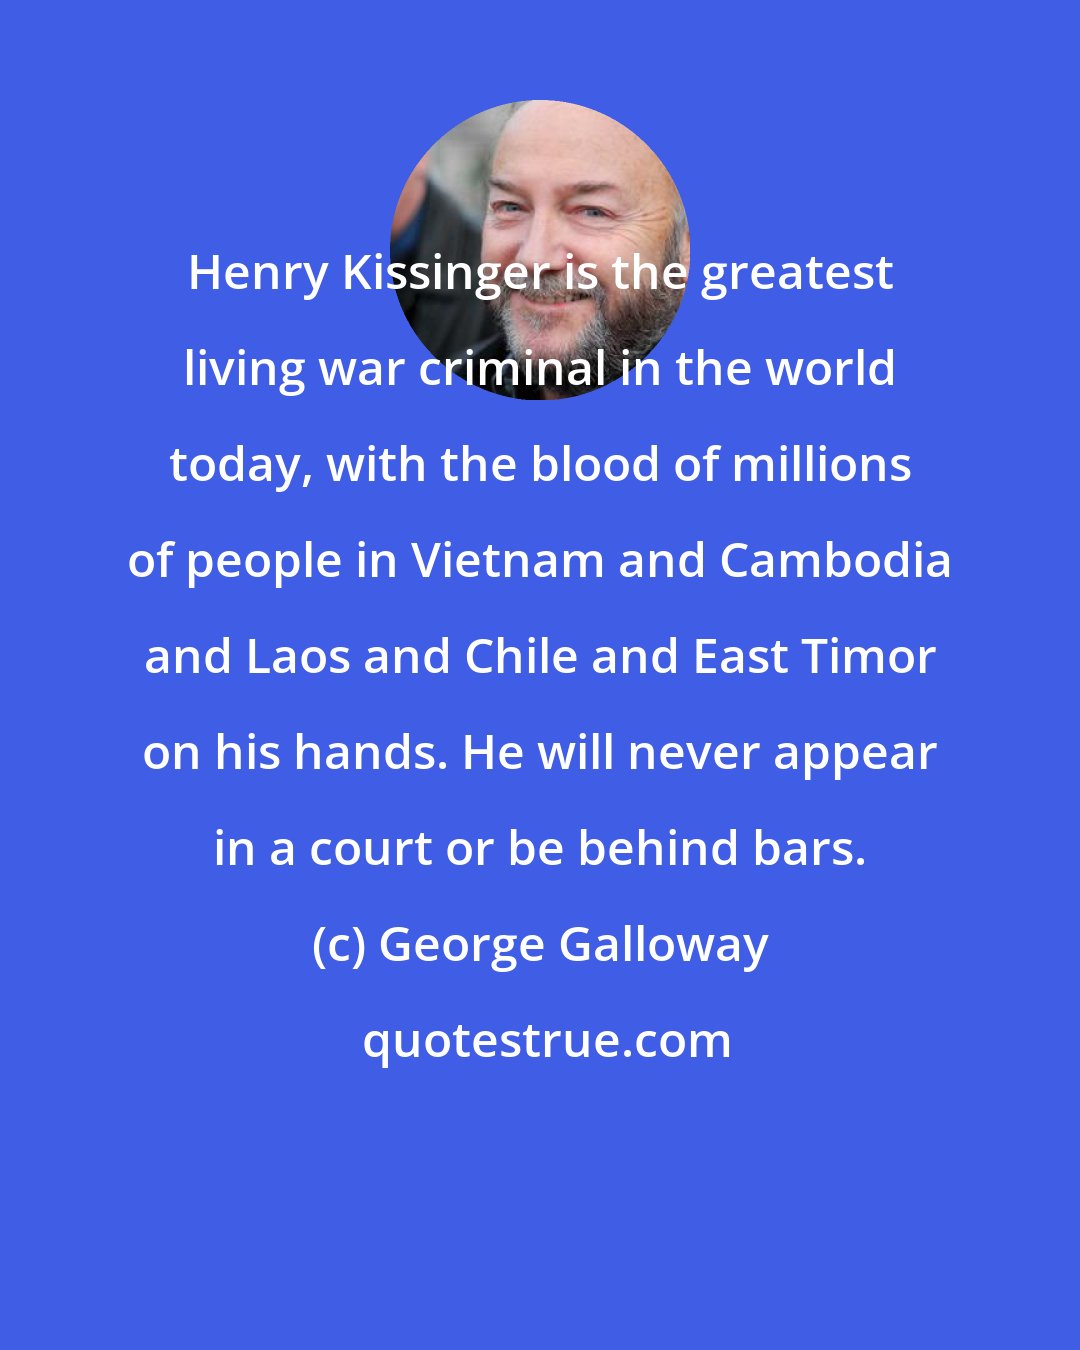 George Galloway: Henry Kissinger is the greatest living war criminal in the world today, with the blood of millions of people in Vietnam and Cambodia and Laos and Chile and East Timor on his hands. He will never appear in a court or be behind bars.